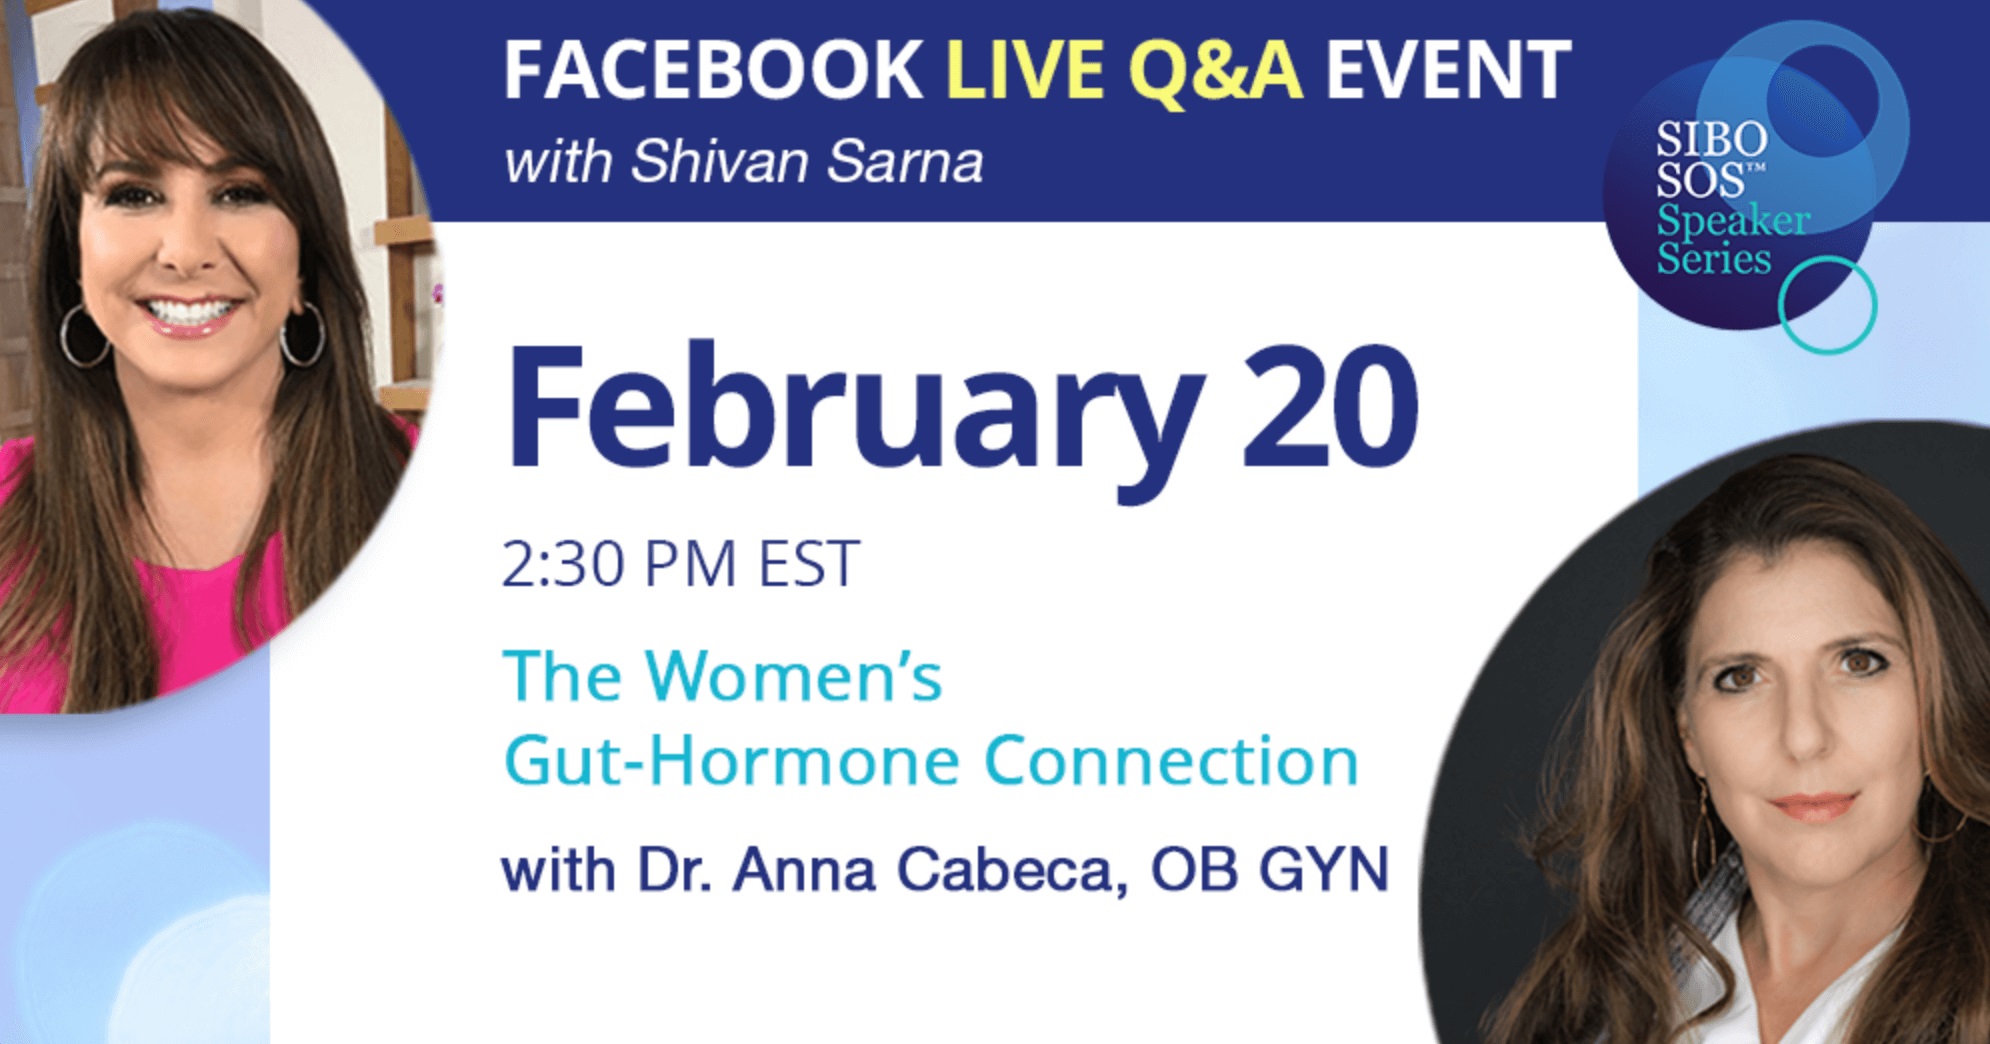 Facebook Live Question and Answer Event with Shivan Sarna